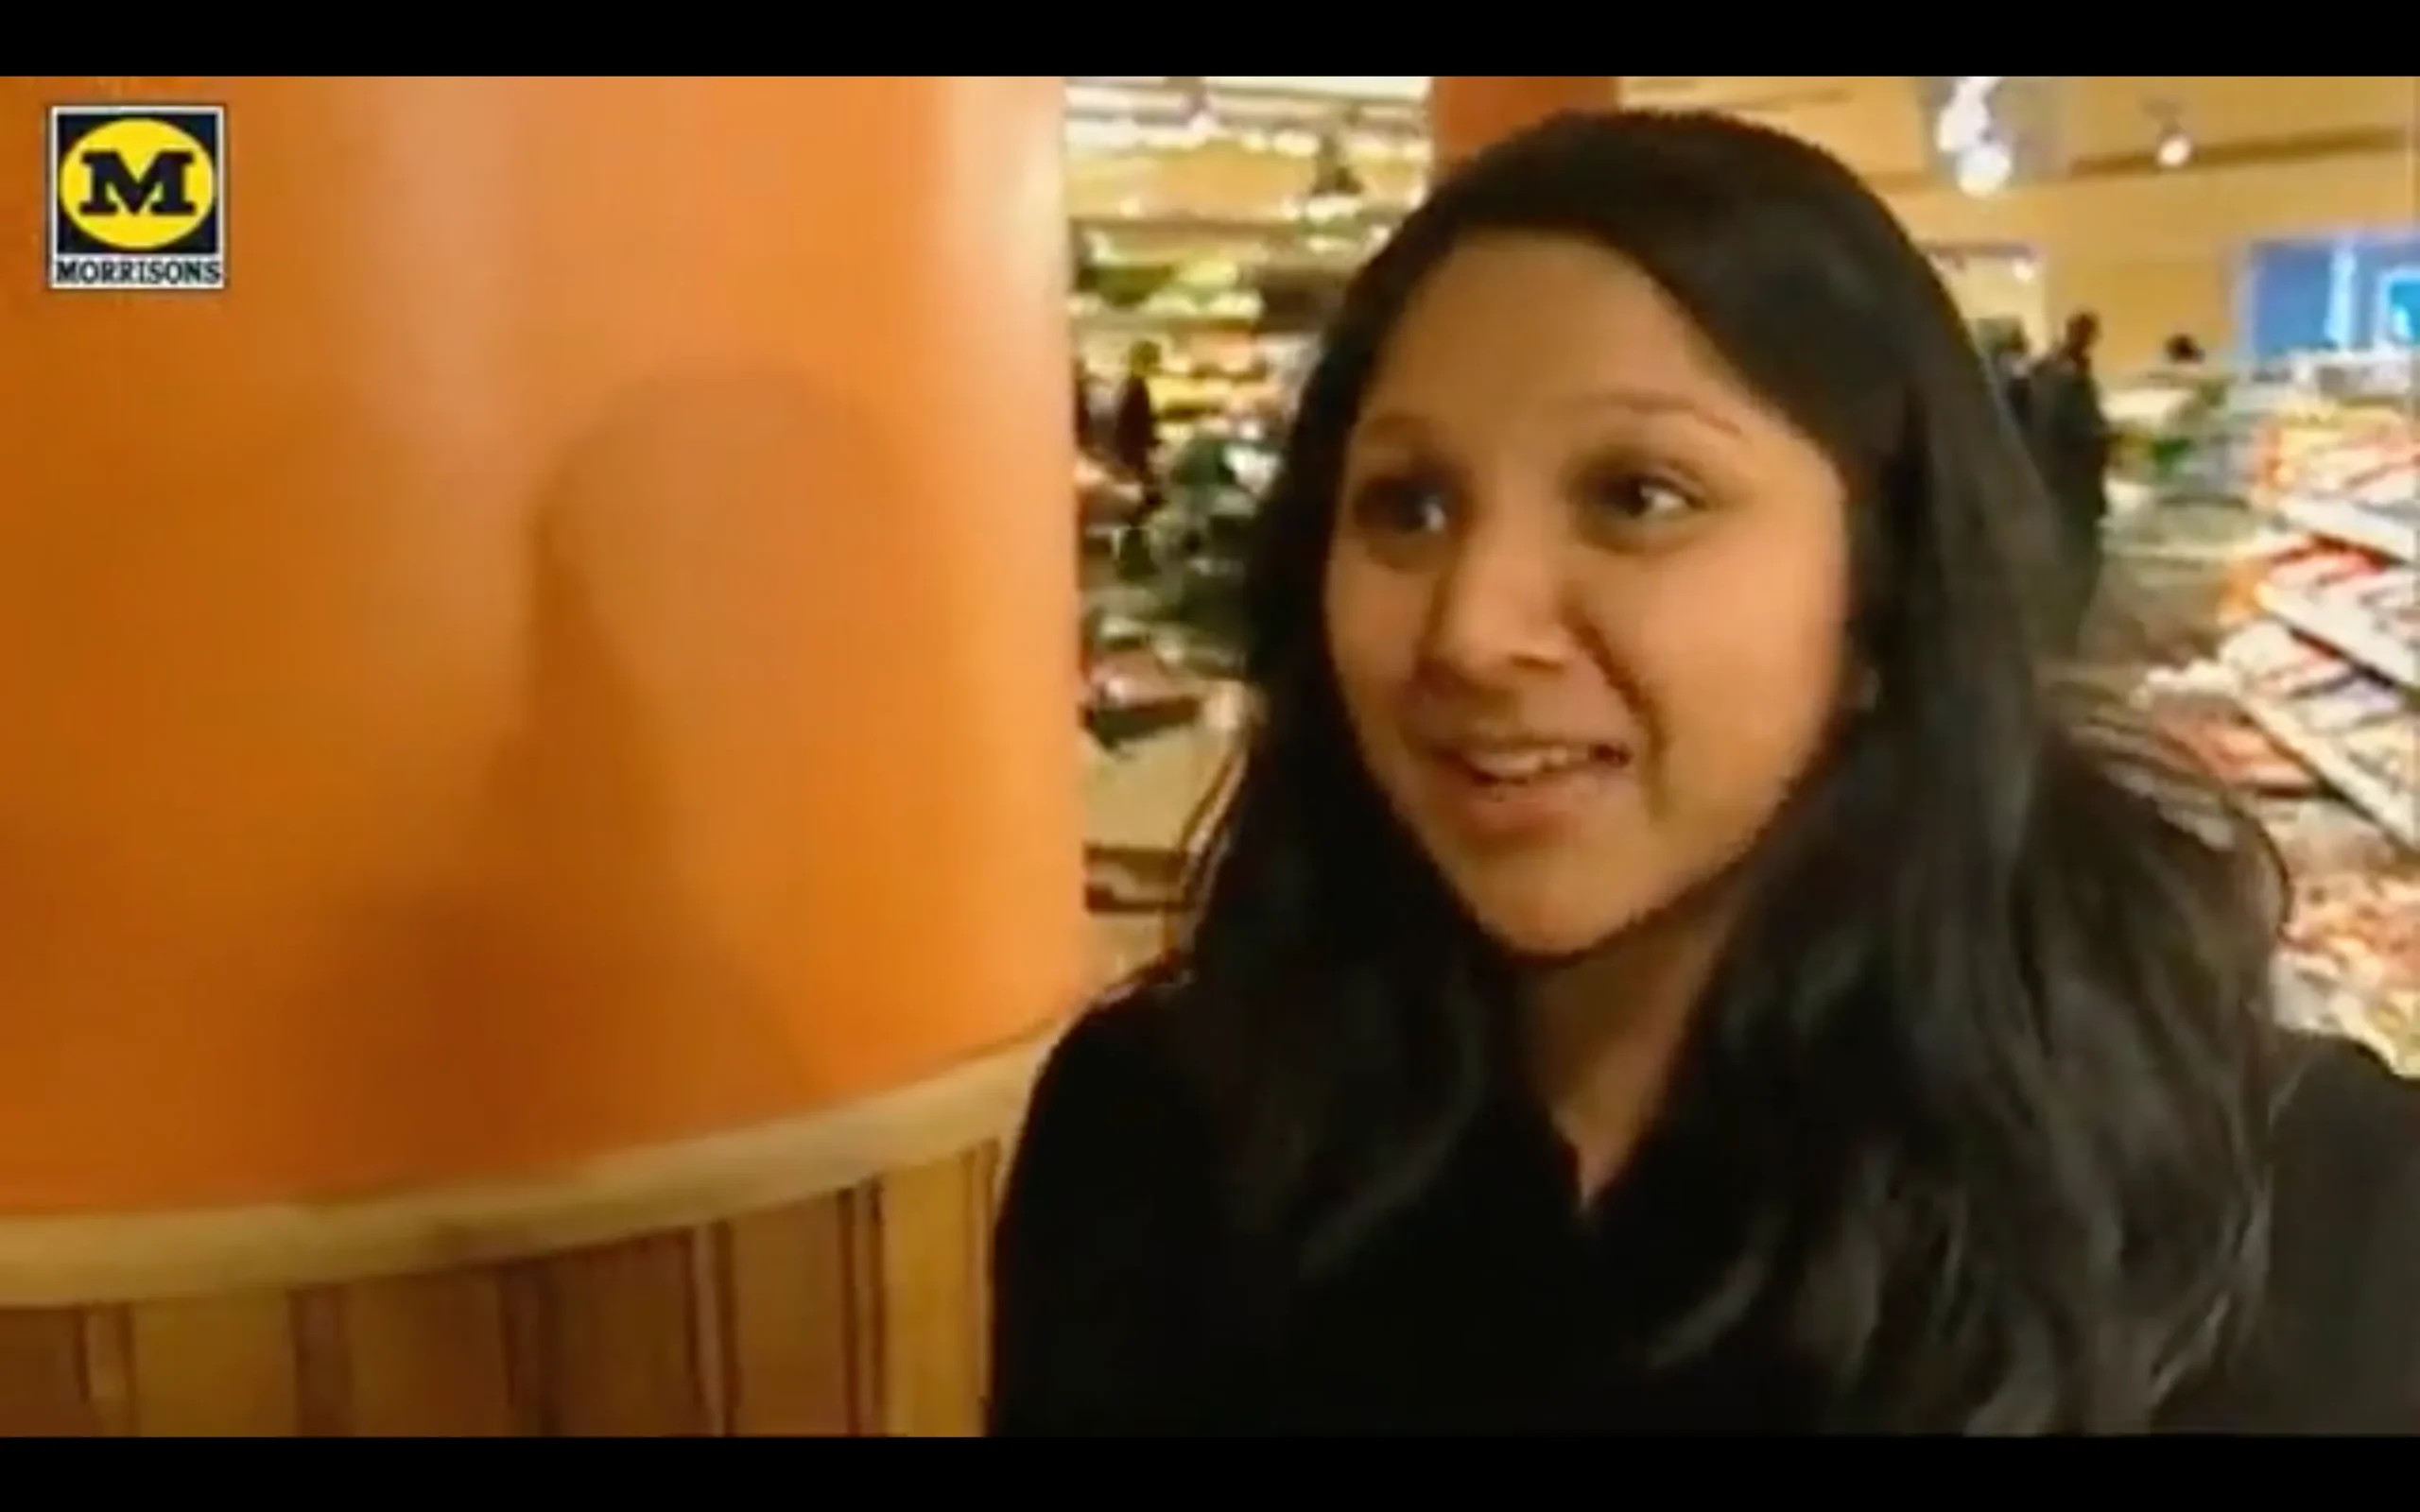 A woman in a supermarket engaging with the camera, discussing her personal experience.